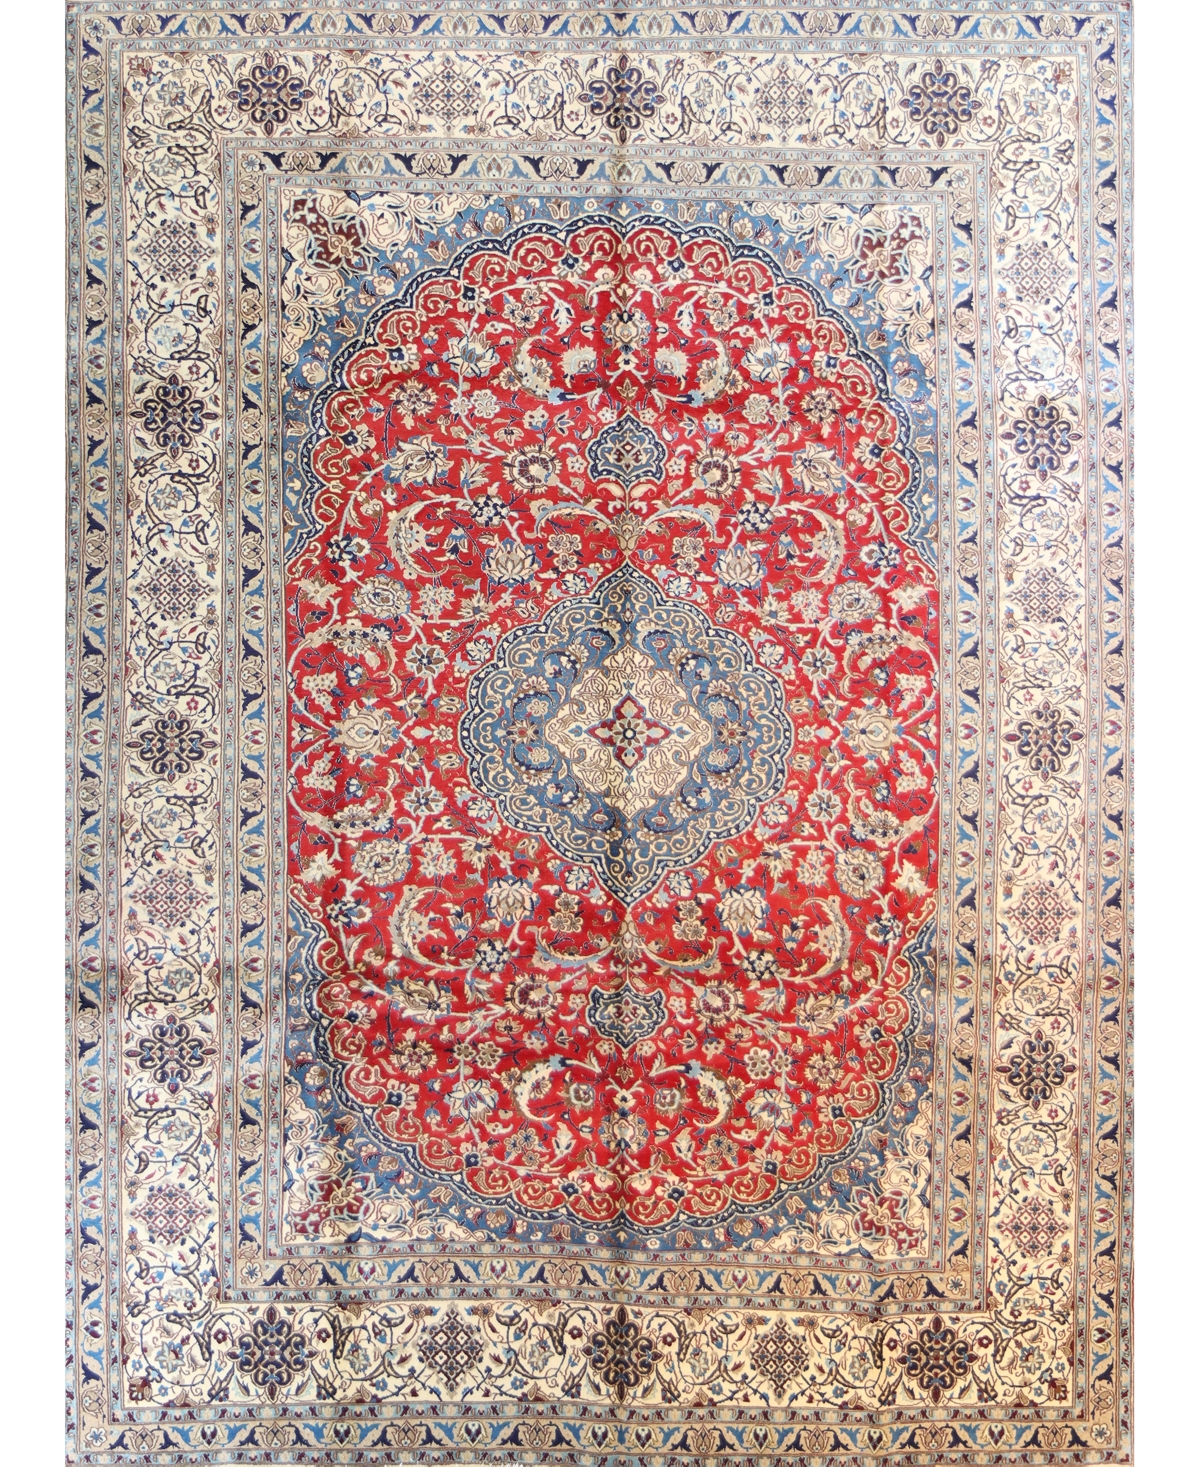 Bb Rugs One Of A Kind Nain With Silk 626342 9'8" X 12'9" Area Rug In Red